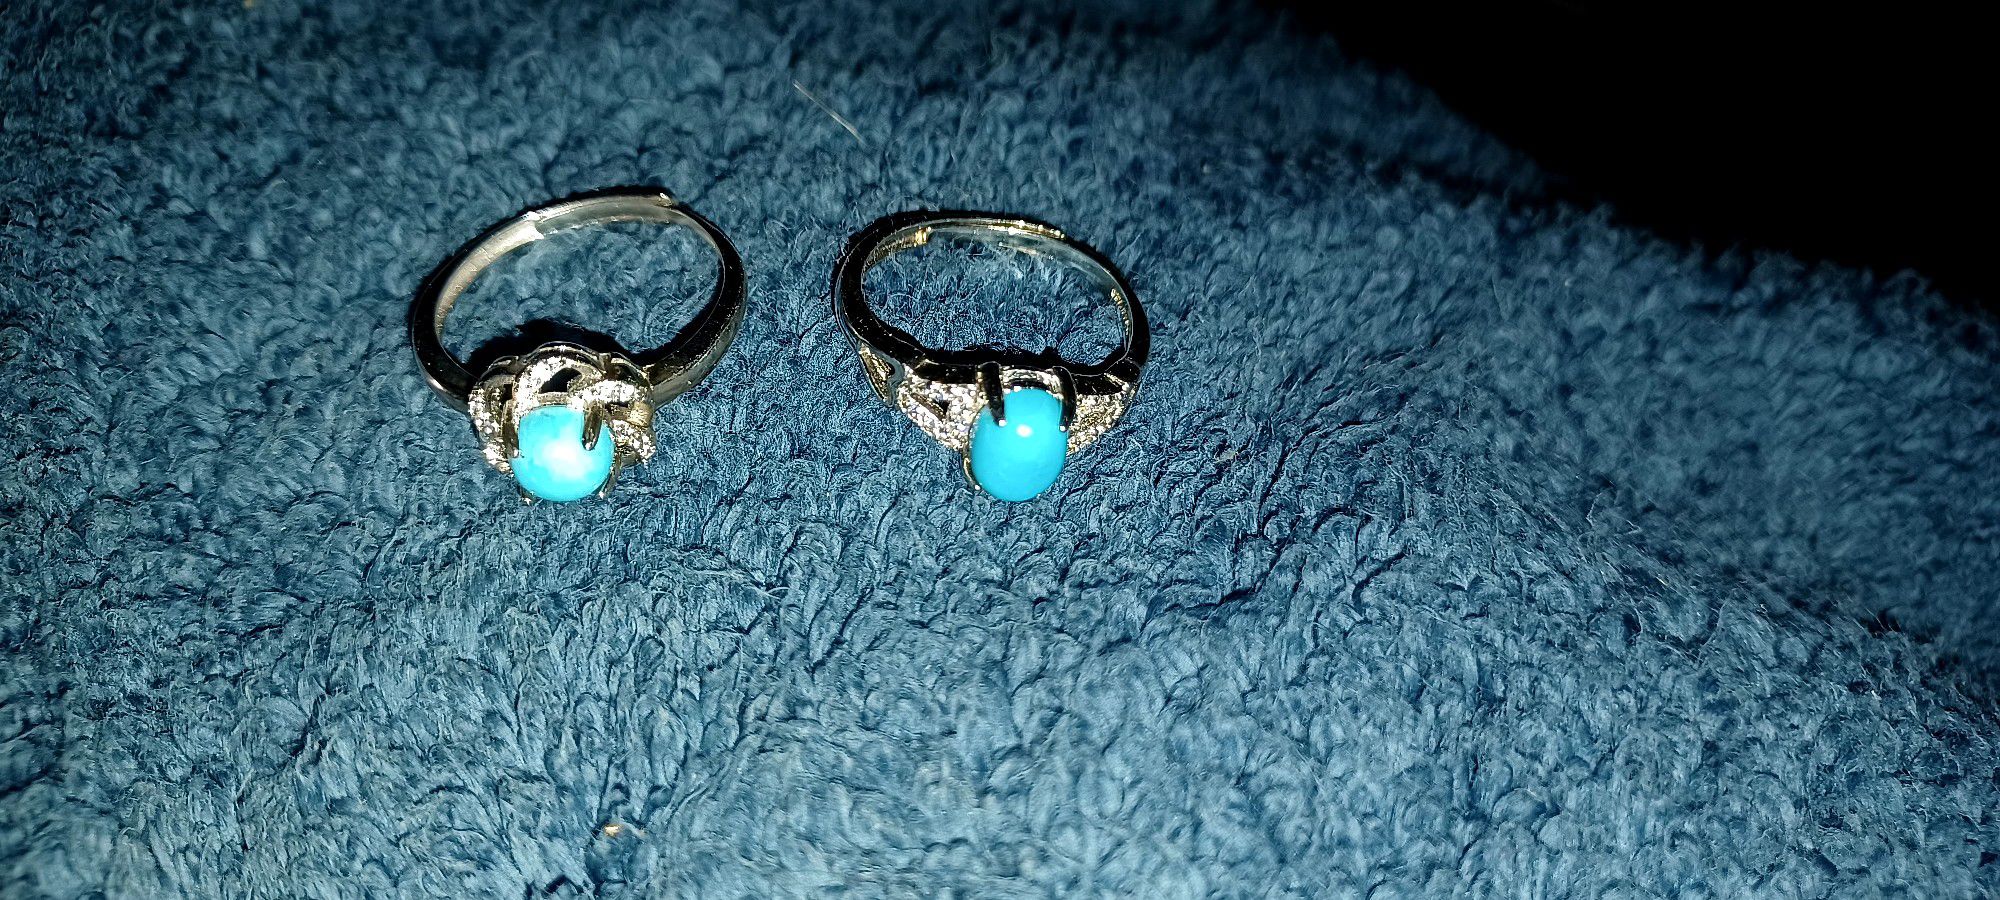 Silver  Ring With Turquoise Stone